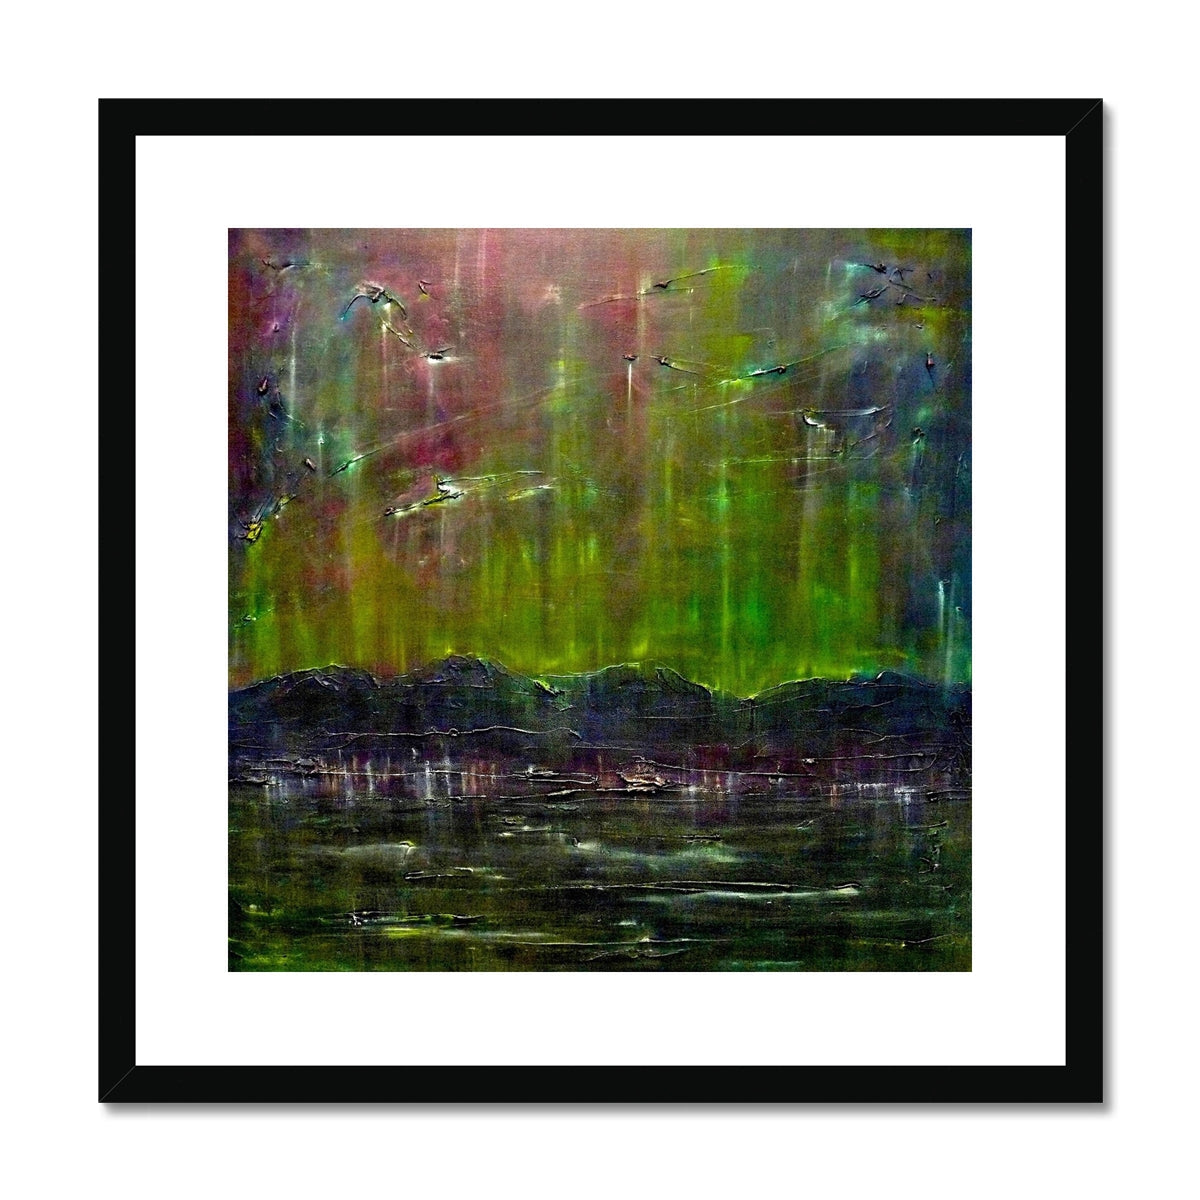 Cromarty Harbour Northern Lights Painting | Framed & Mounted Prints From Scotland-Framed & Mounted Prints-Scottish Highlands & Lowlands Art Gallery-20"x20"-Black Frame-Paintings, Prints, Homeware, Art Gifts From Scotland By Scottish Artist Kevin Hunter